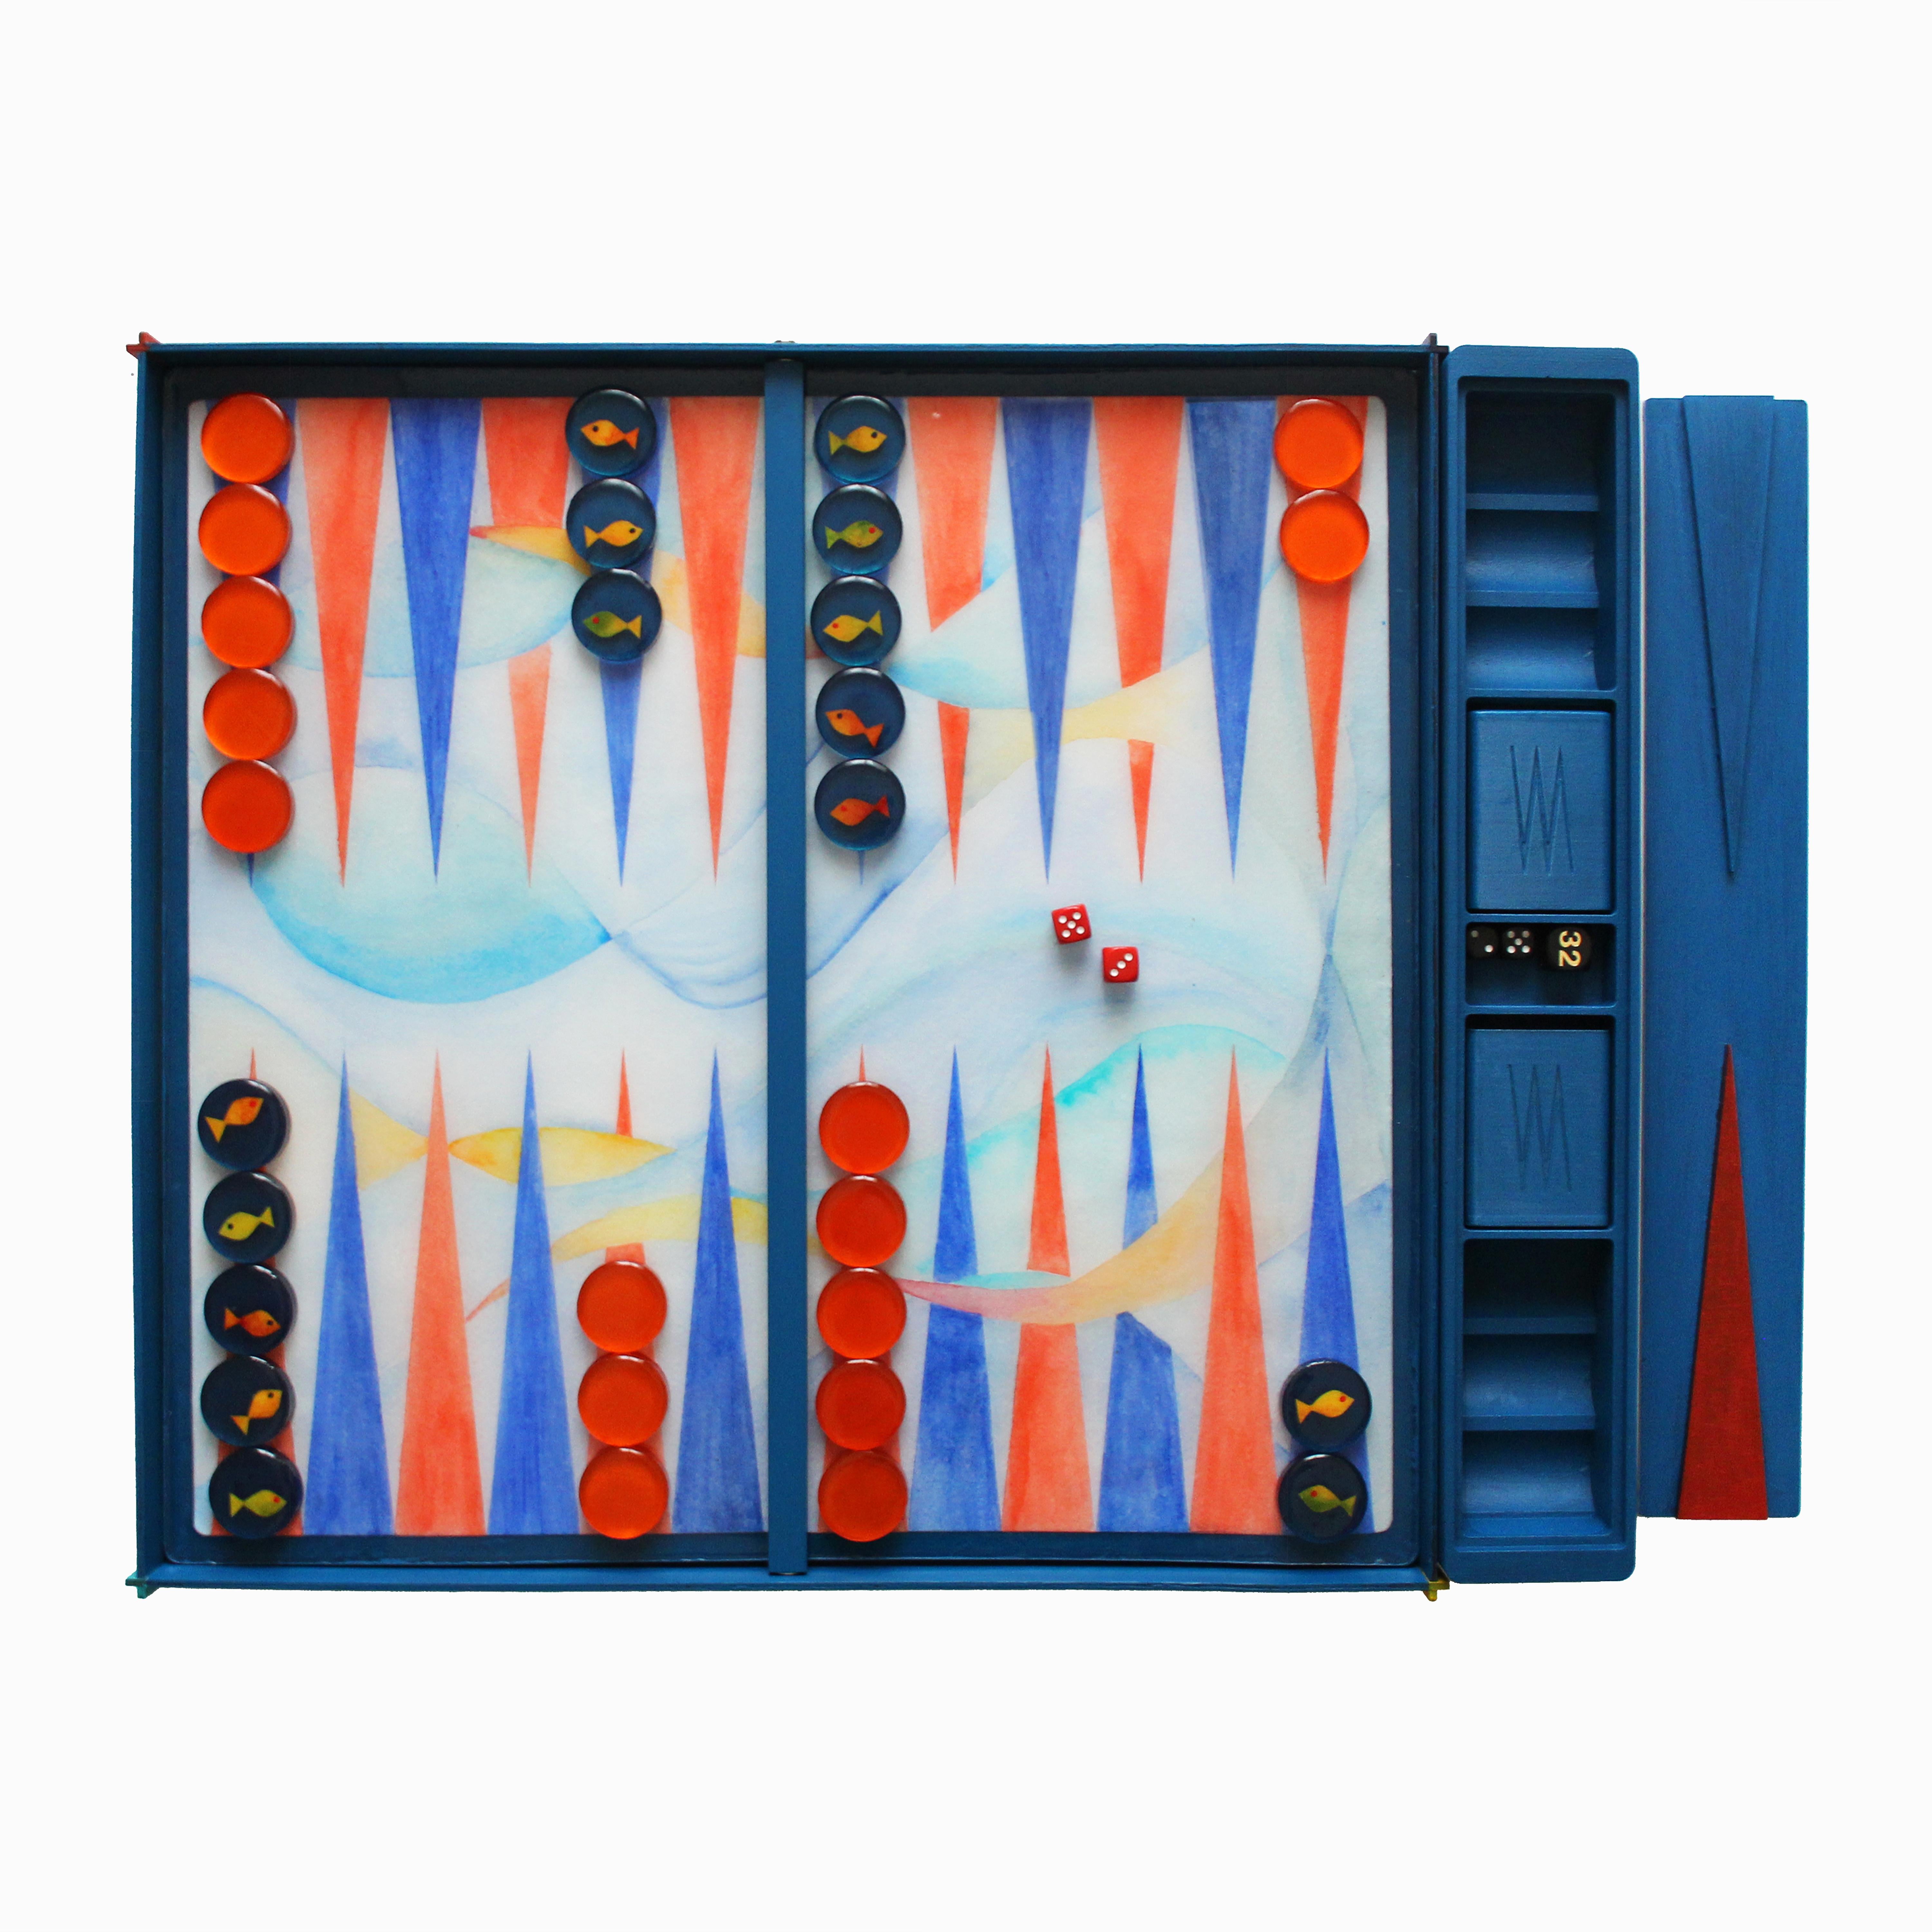 The Backgammon Board is an handmade limited collection (100 pieces) designed by the young Milan based Valeria Molinari for Dilmos Edizioni. The project, composed of four boards inspired by the elements of water, air, fire and earth, is
born from